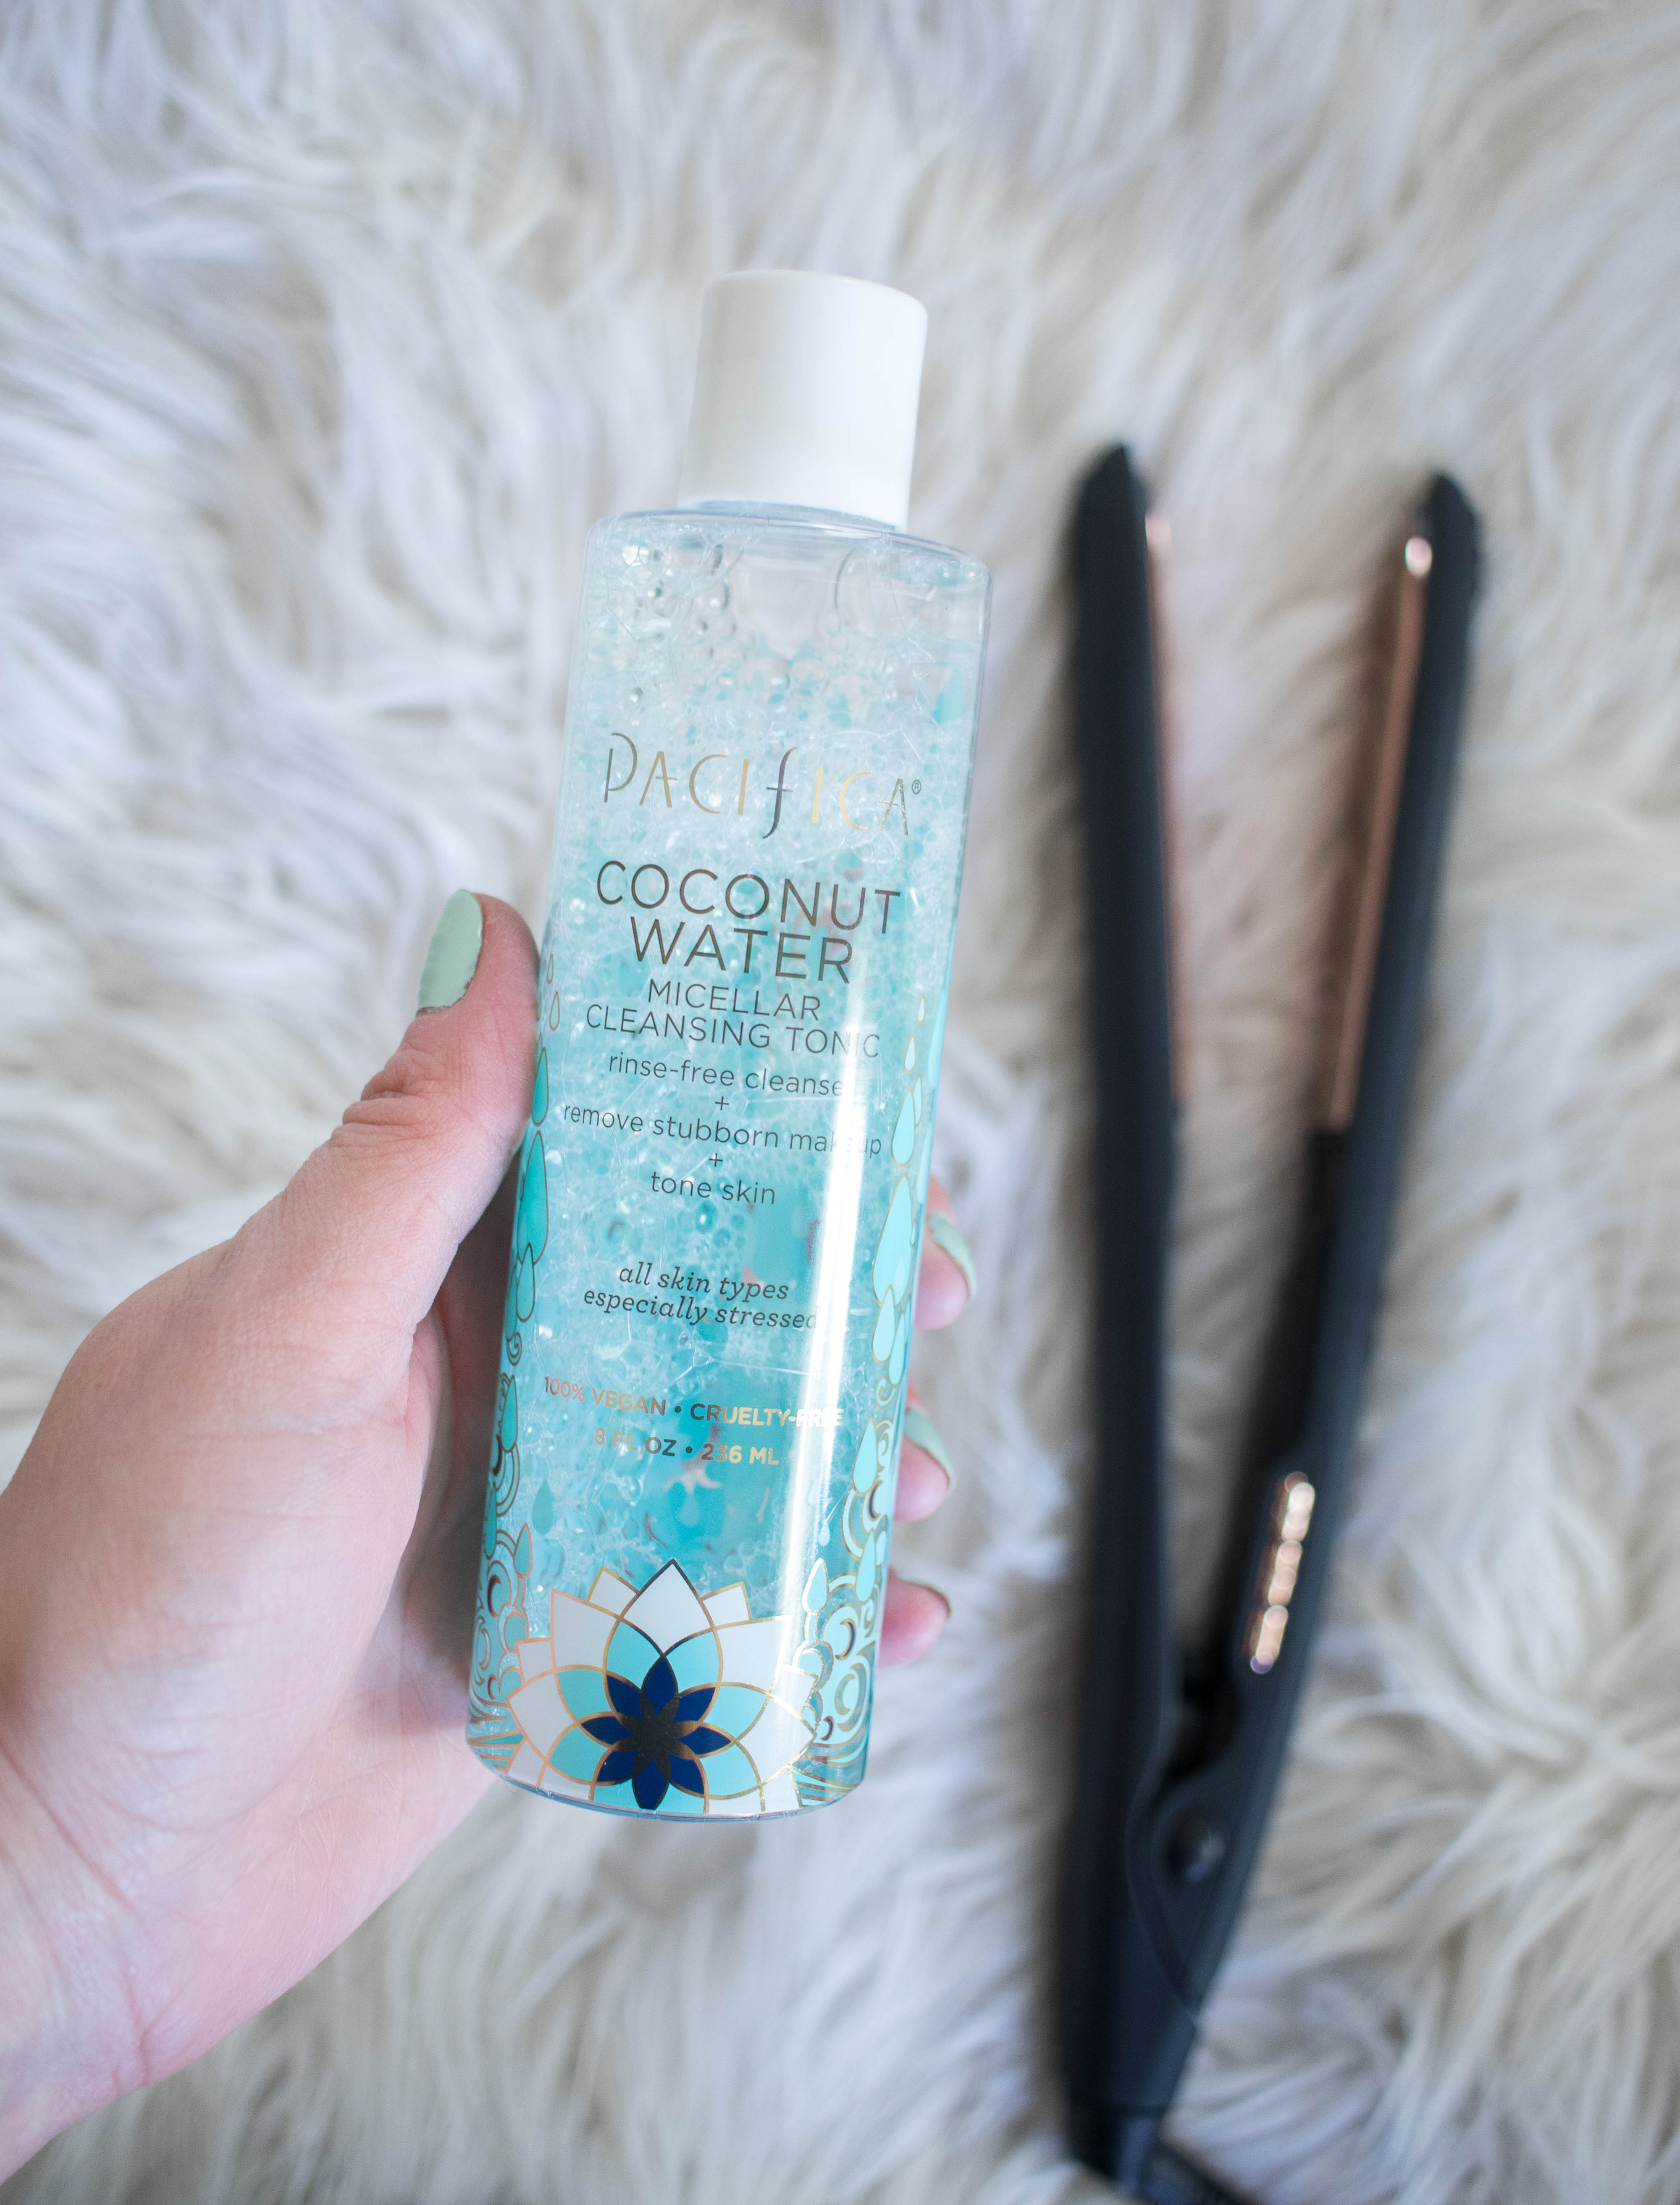 Pacifica micellar water makeup remover review #pacificabeauty #cleanbeauty #naturalskincare